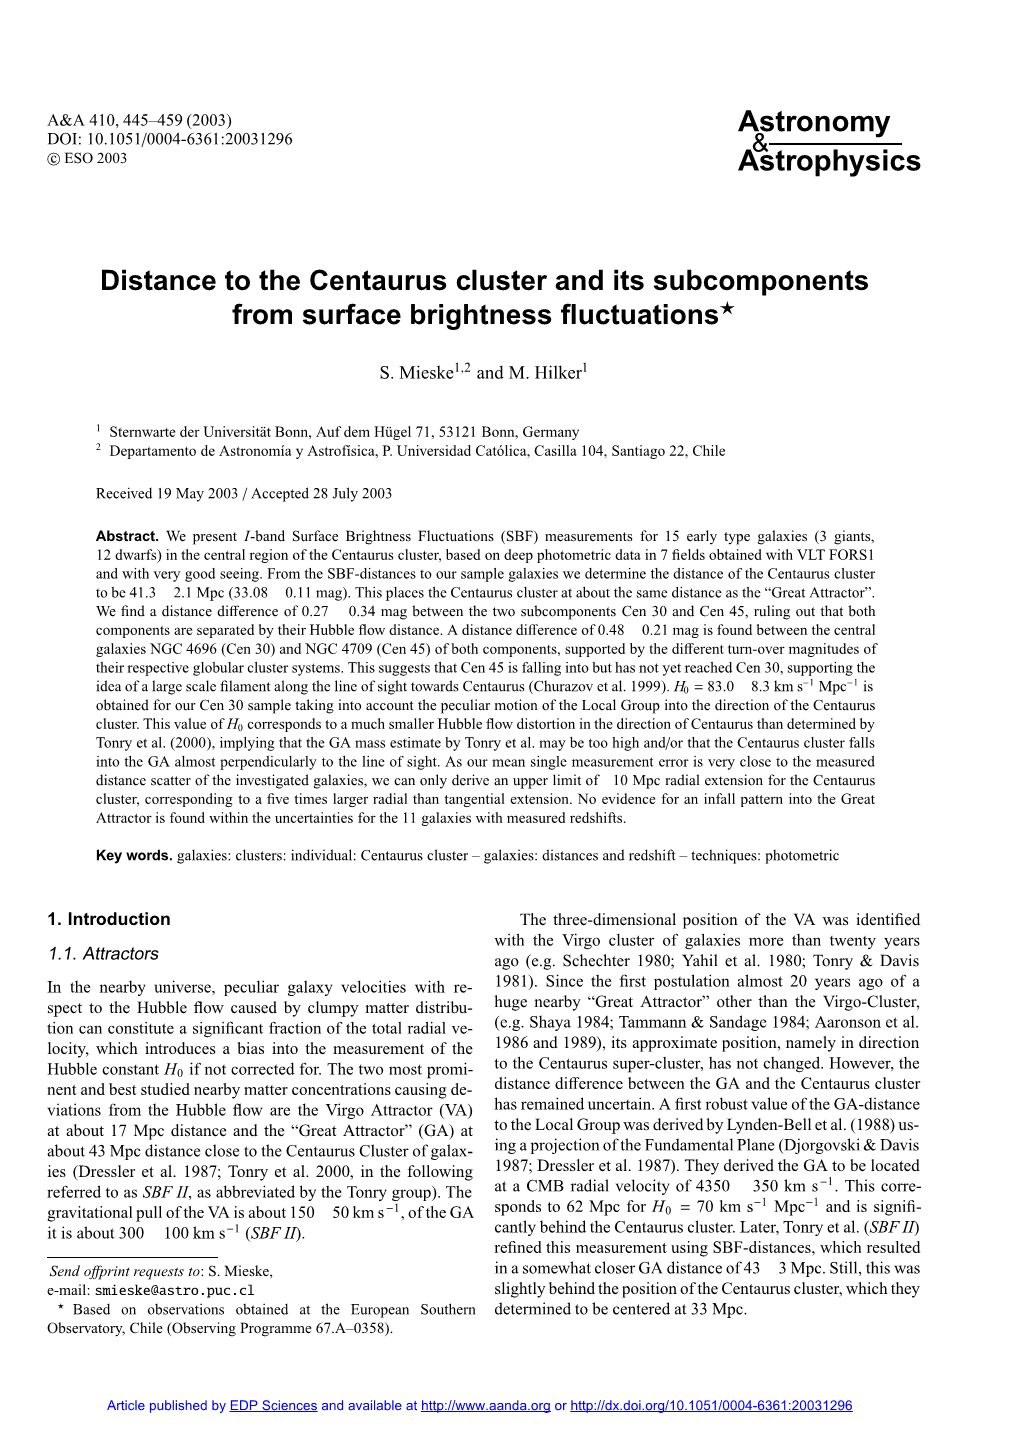 Distance to the Centaurus Cluster and Its Subcomponents from Surface Brightness ﬂuctuations